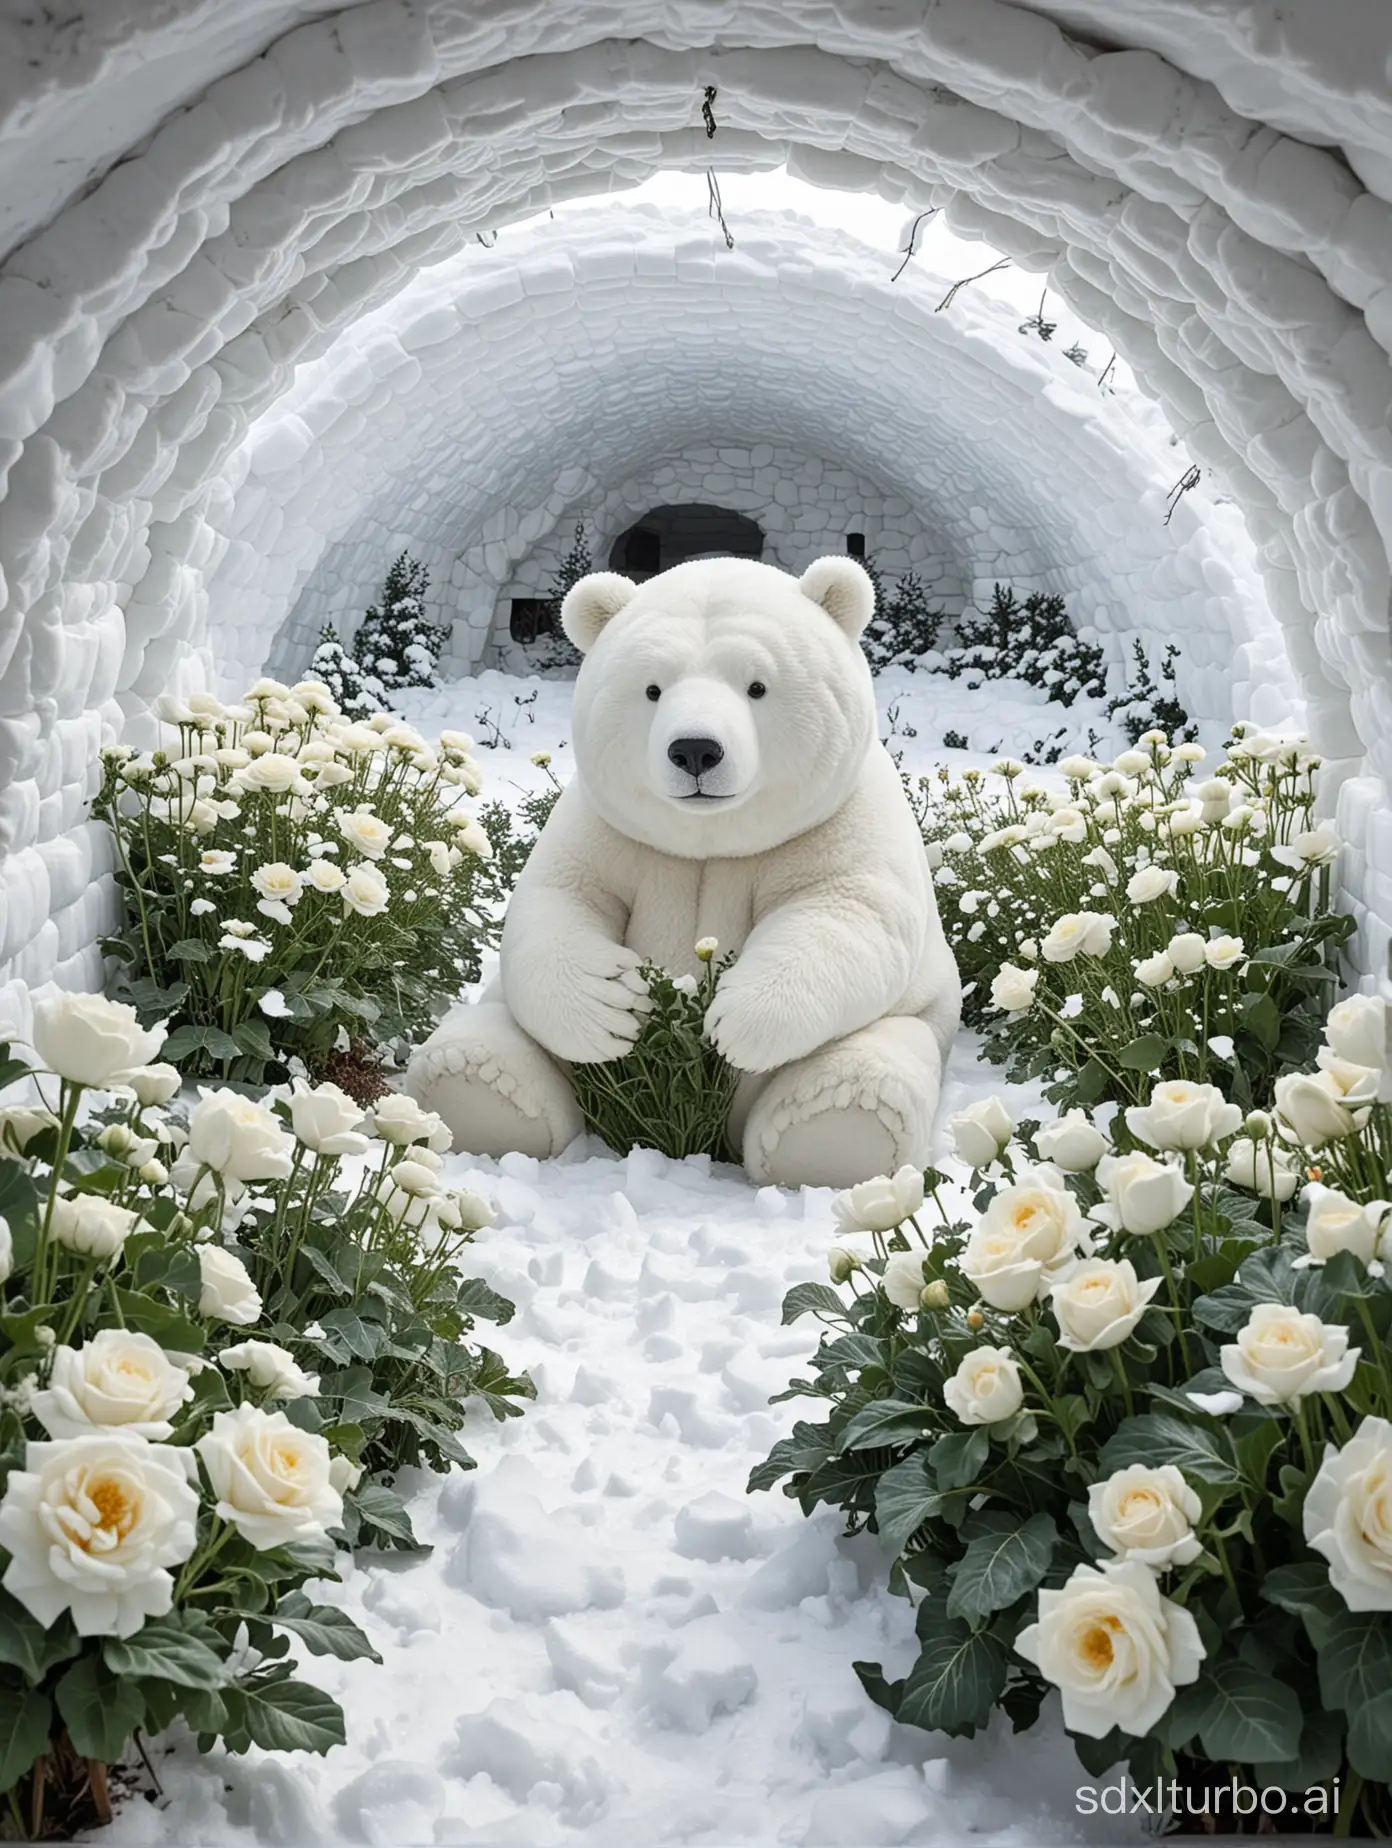 White-Bear-in-Igloo-with-Cabbage-Curious-Encounter-with-Spring-Blooms